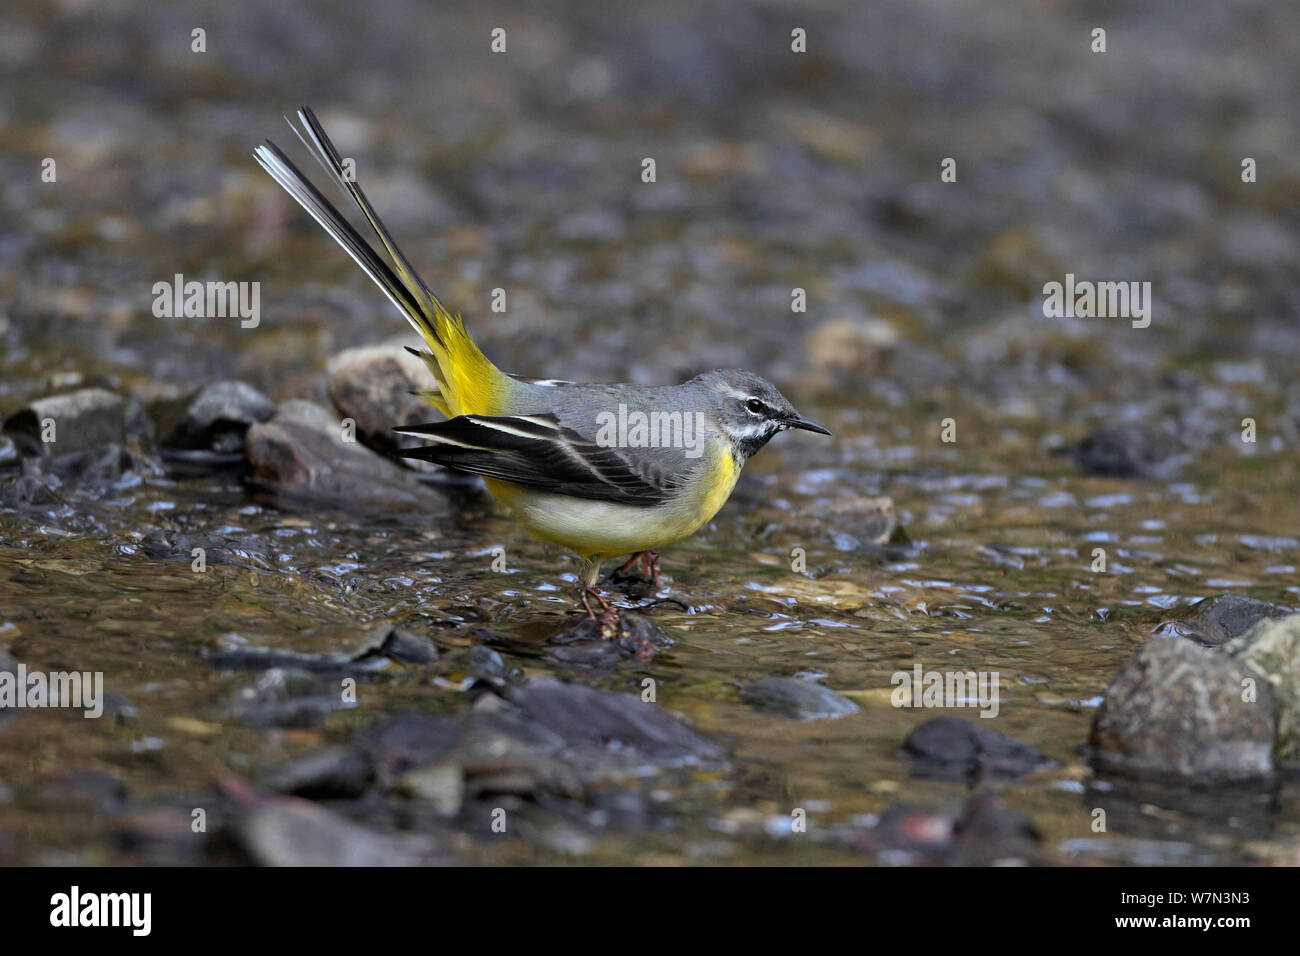 Male Grey Wagtail (Motacilla cinerea) displaying in stream, Clwyd, North Wales, UK, March Stock Photo